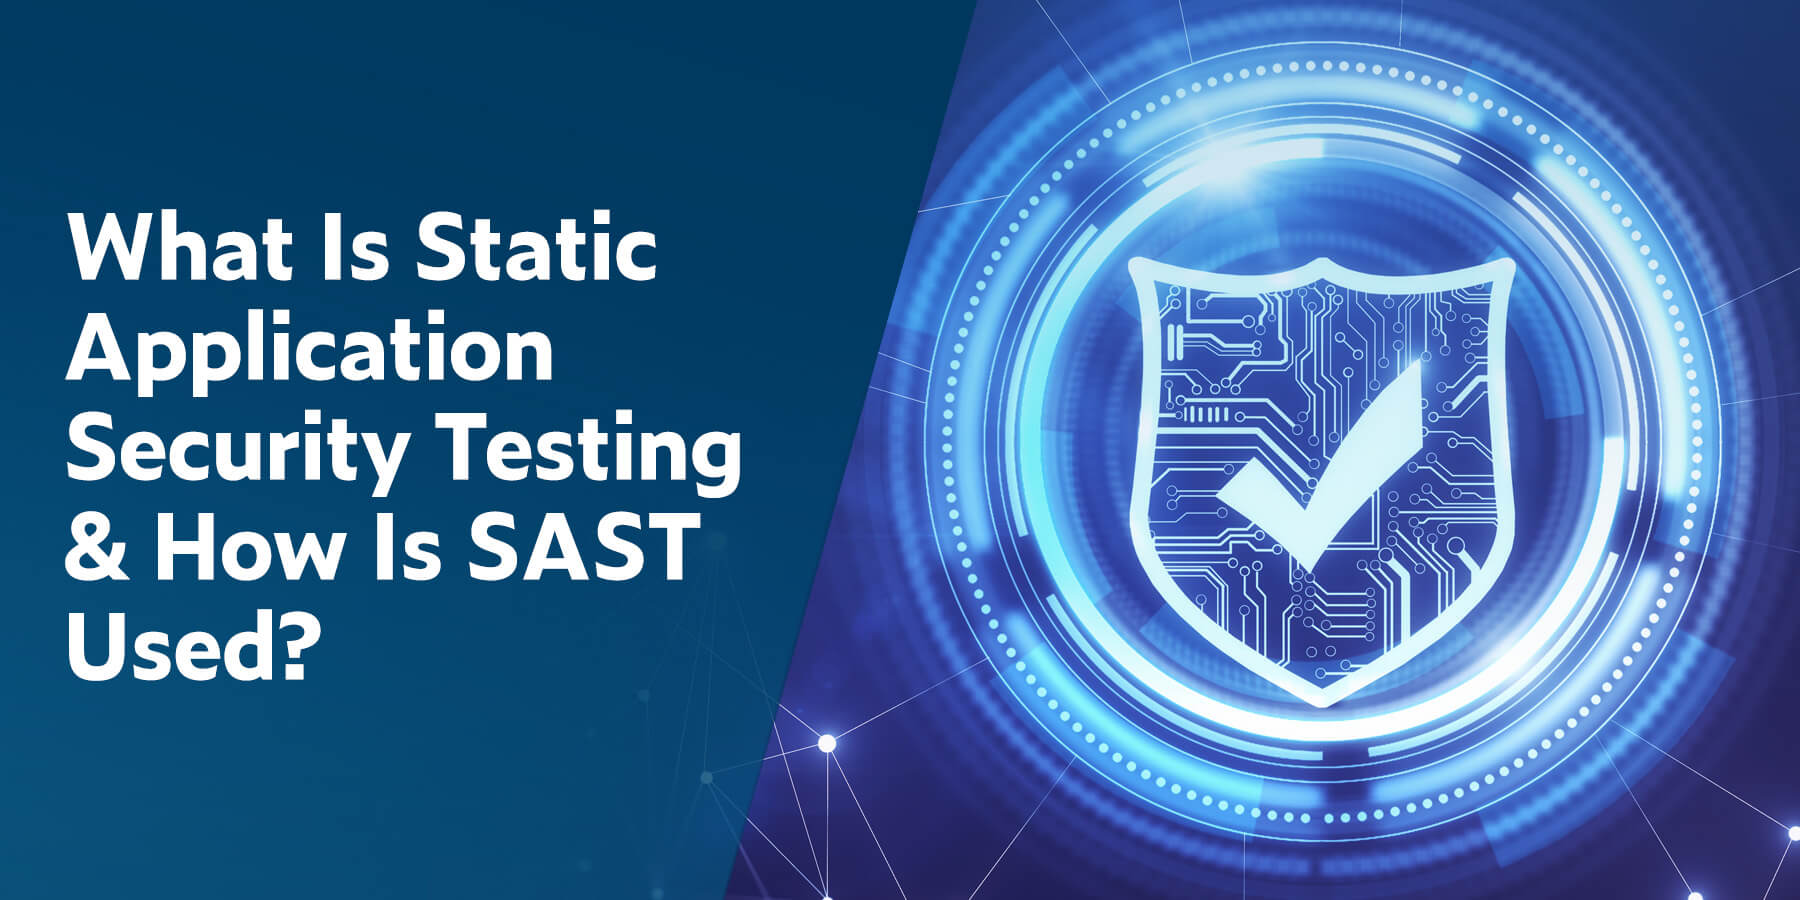 What Is Static Application Security Testing and How Is SAST Used?